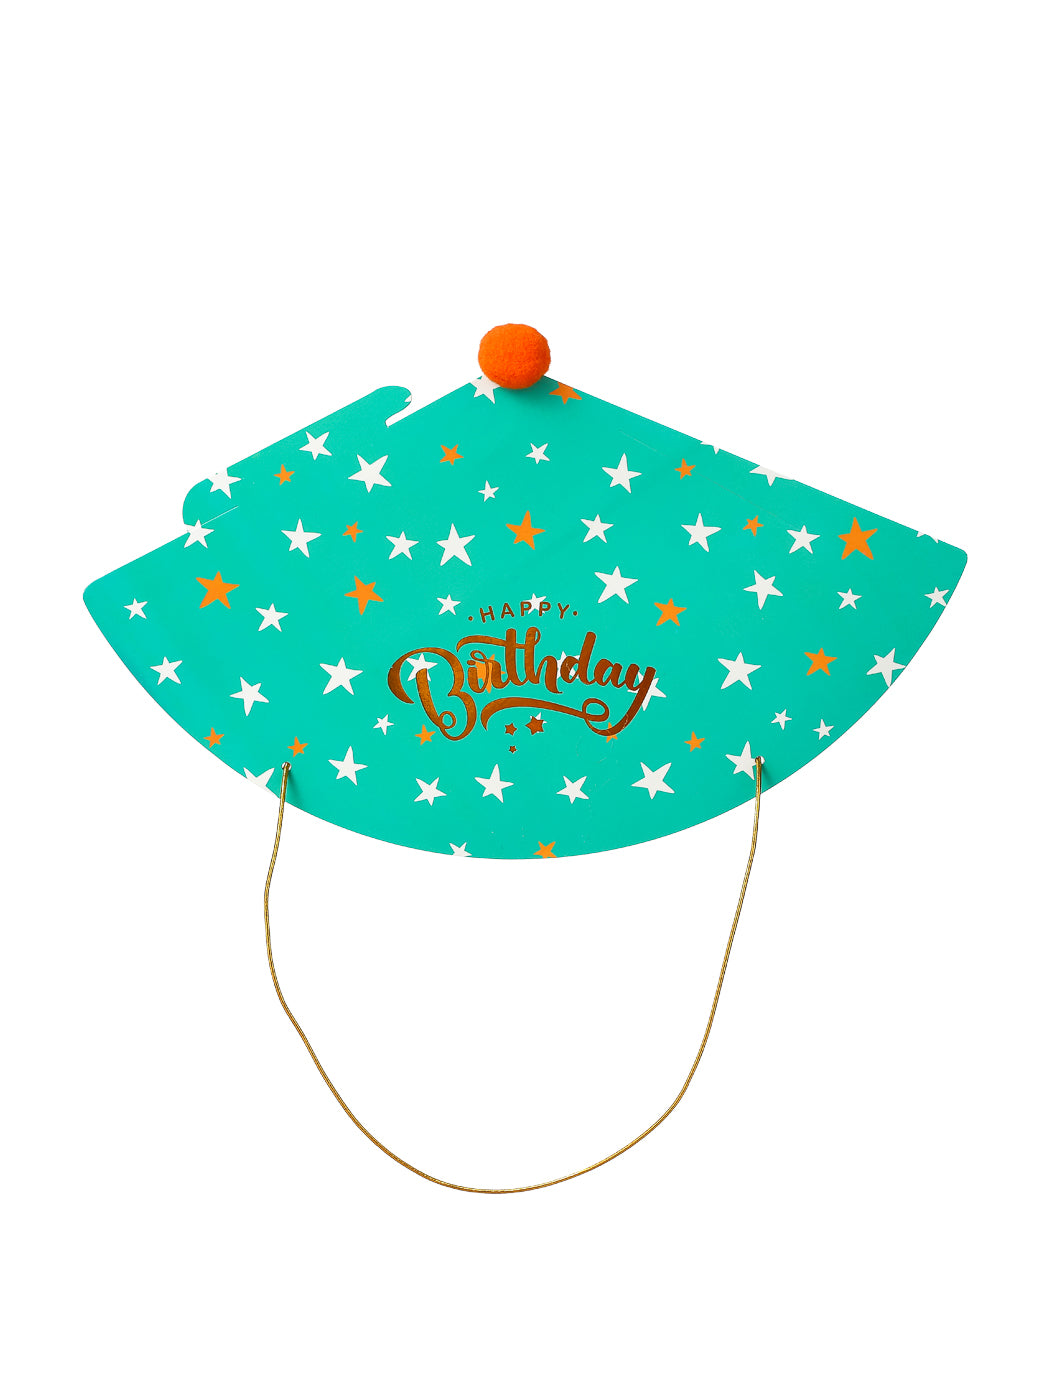 MINISO BIRTHDAY PARTY HAT(GREEN, STARS) 2010879910100 PARTY DECORATIONS